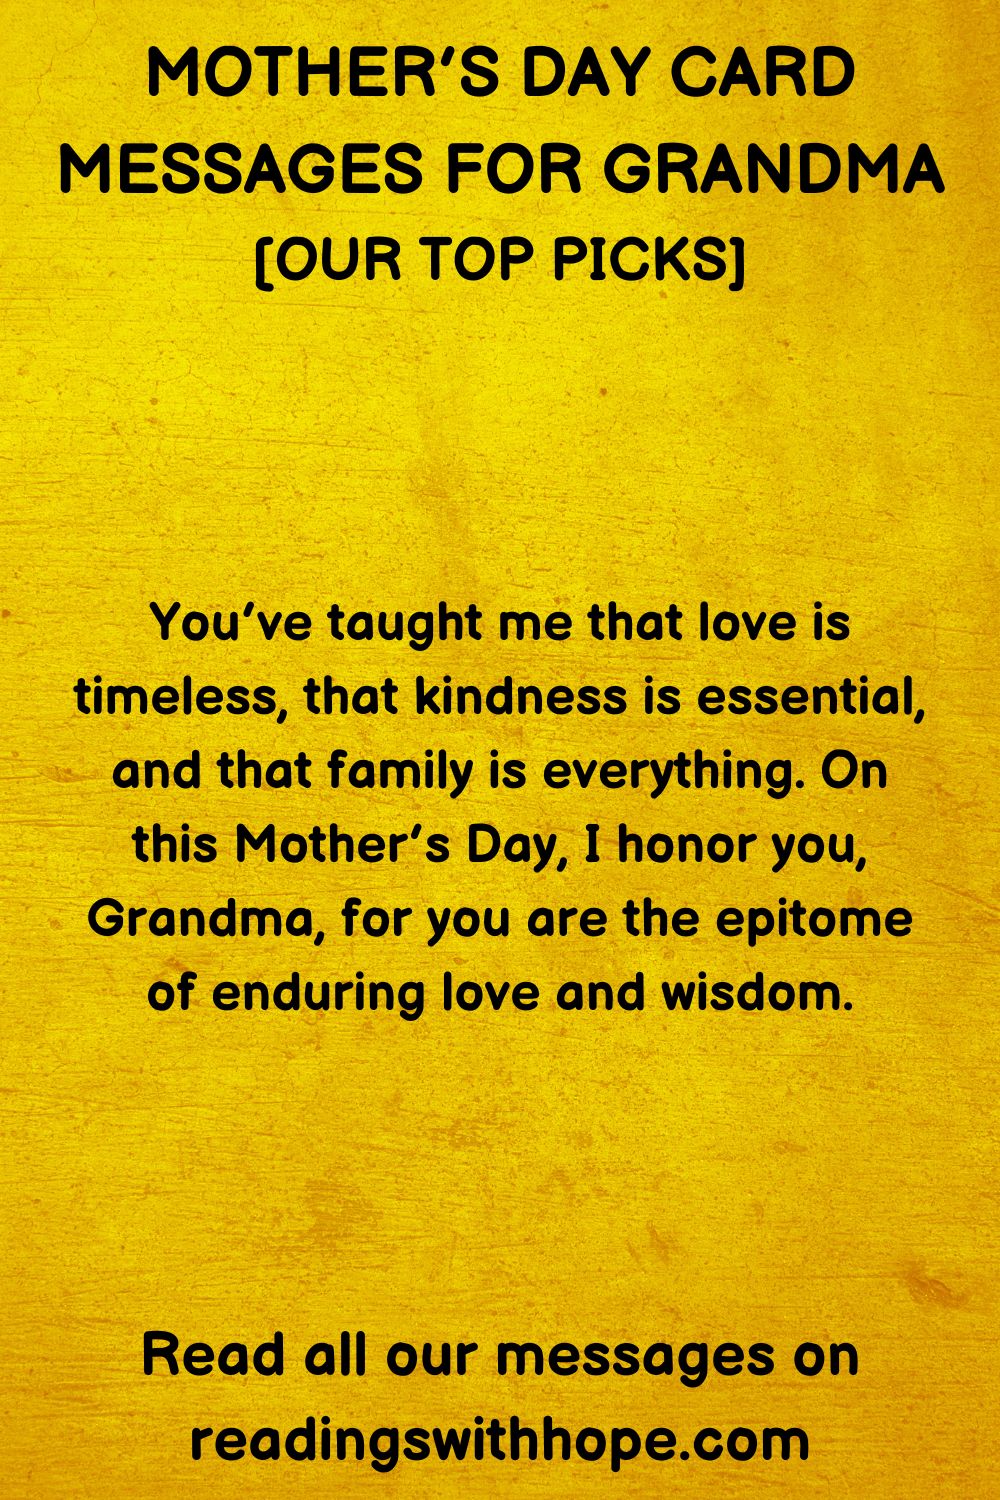 35 Mother's Day Messages for Grandma